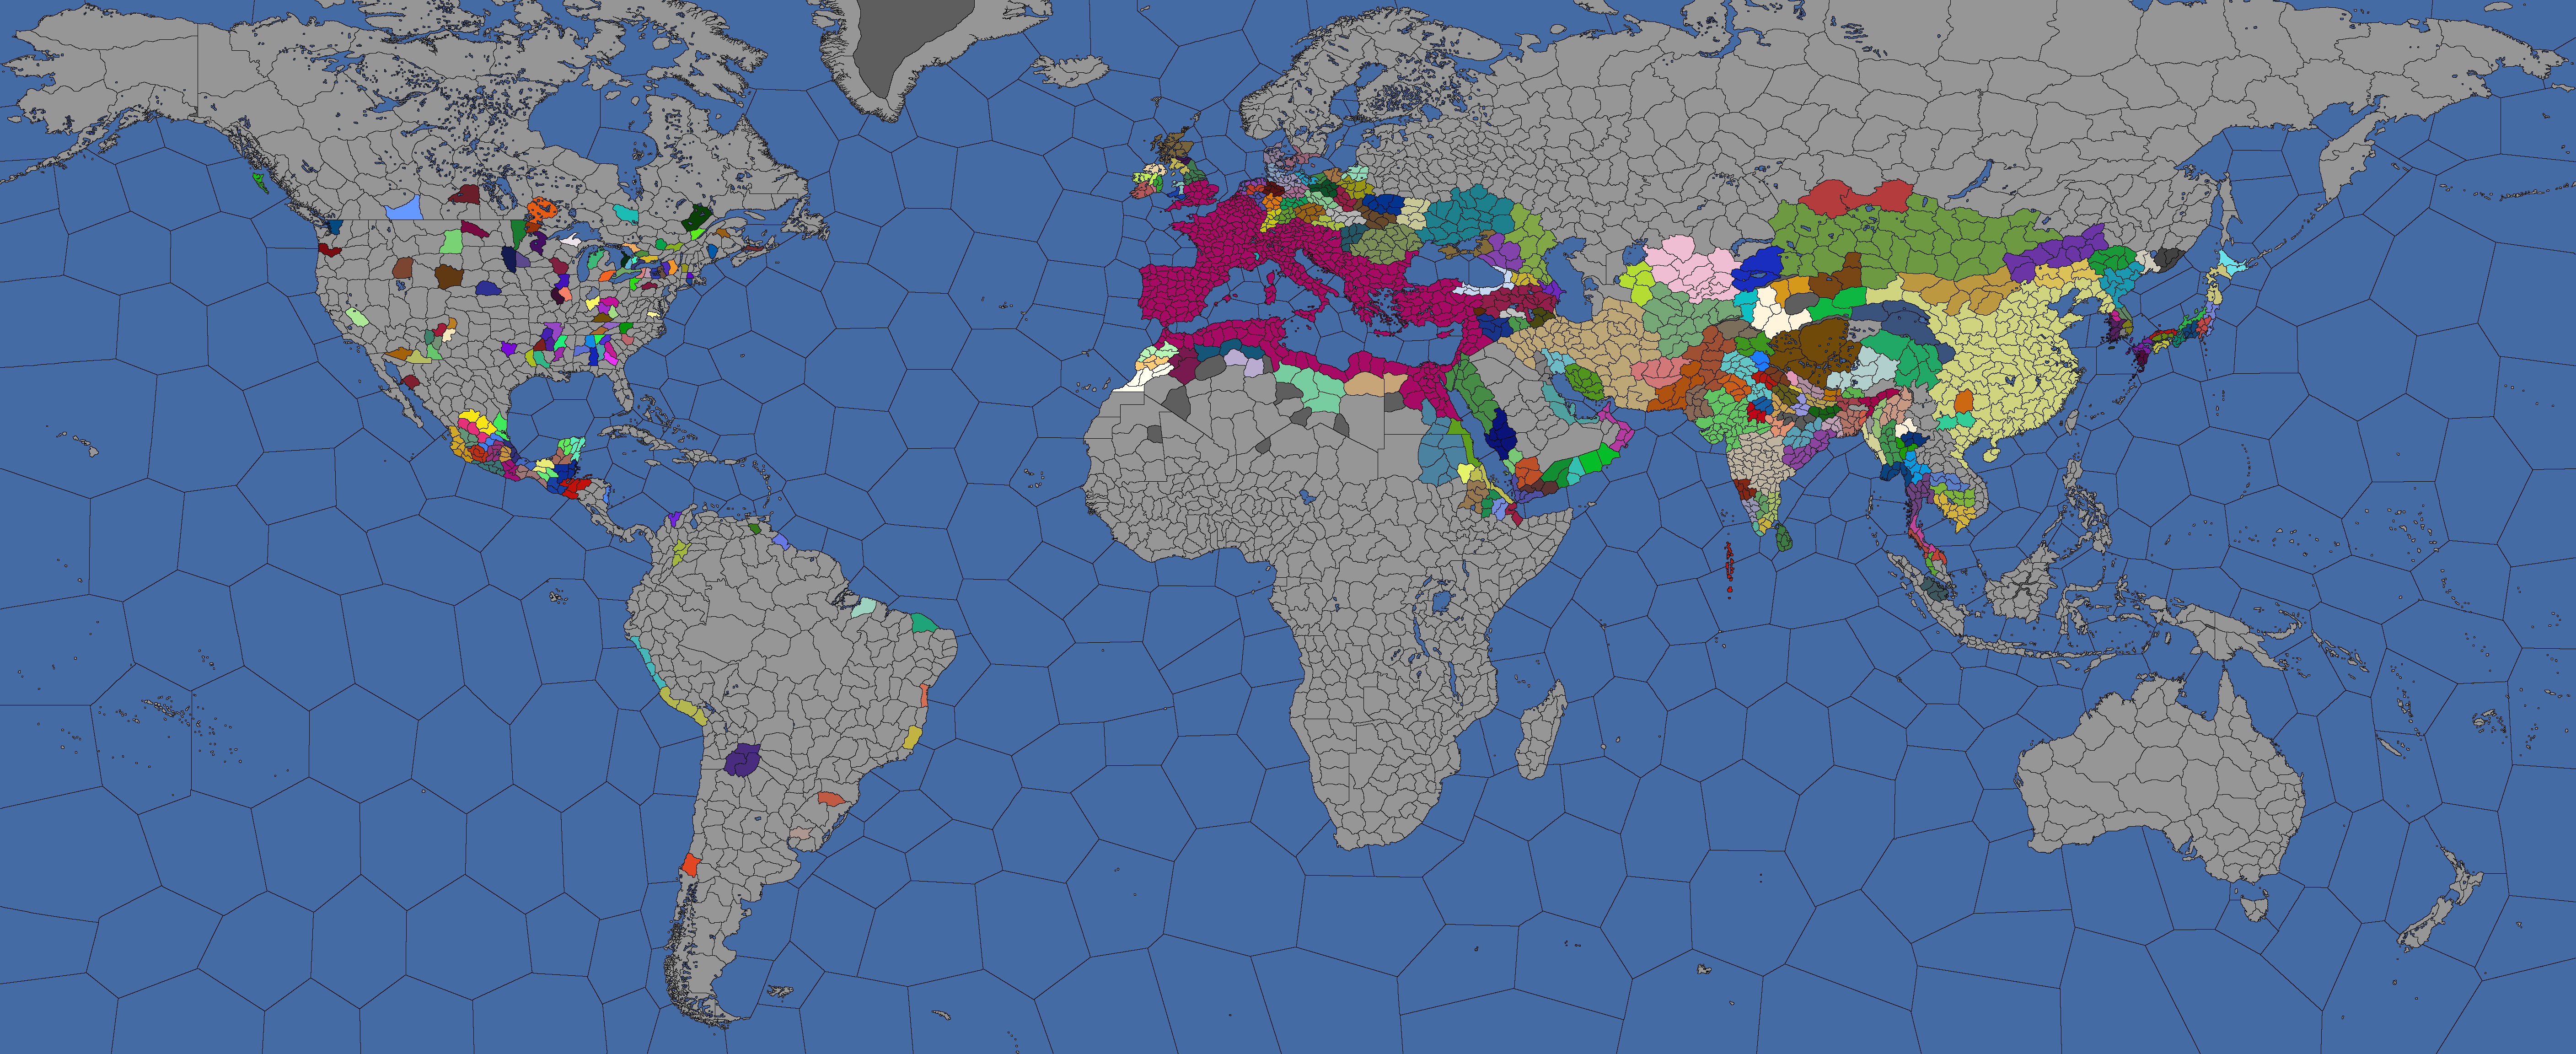 europa universalis 4 extended timeline mod empire